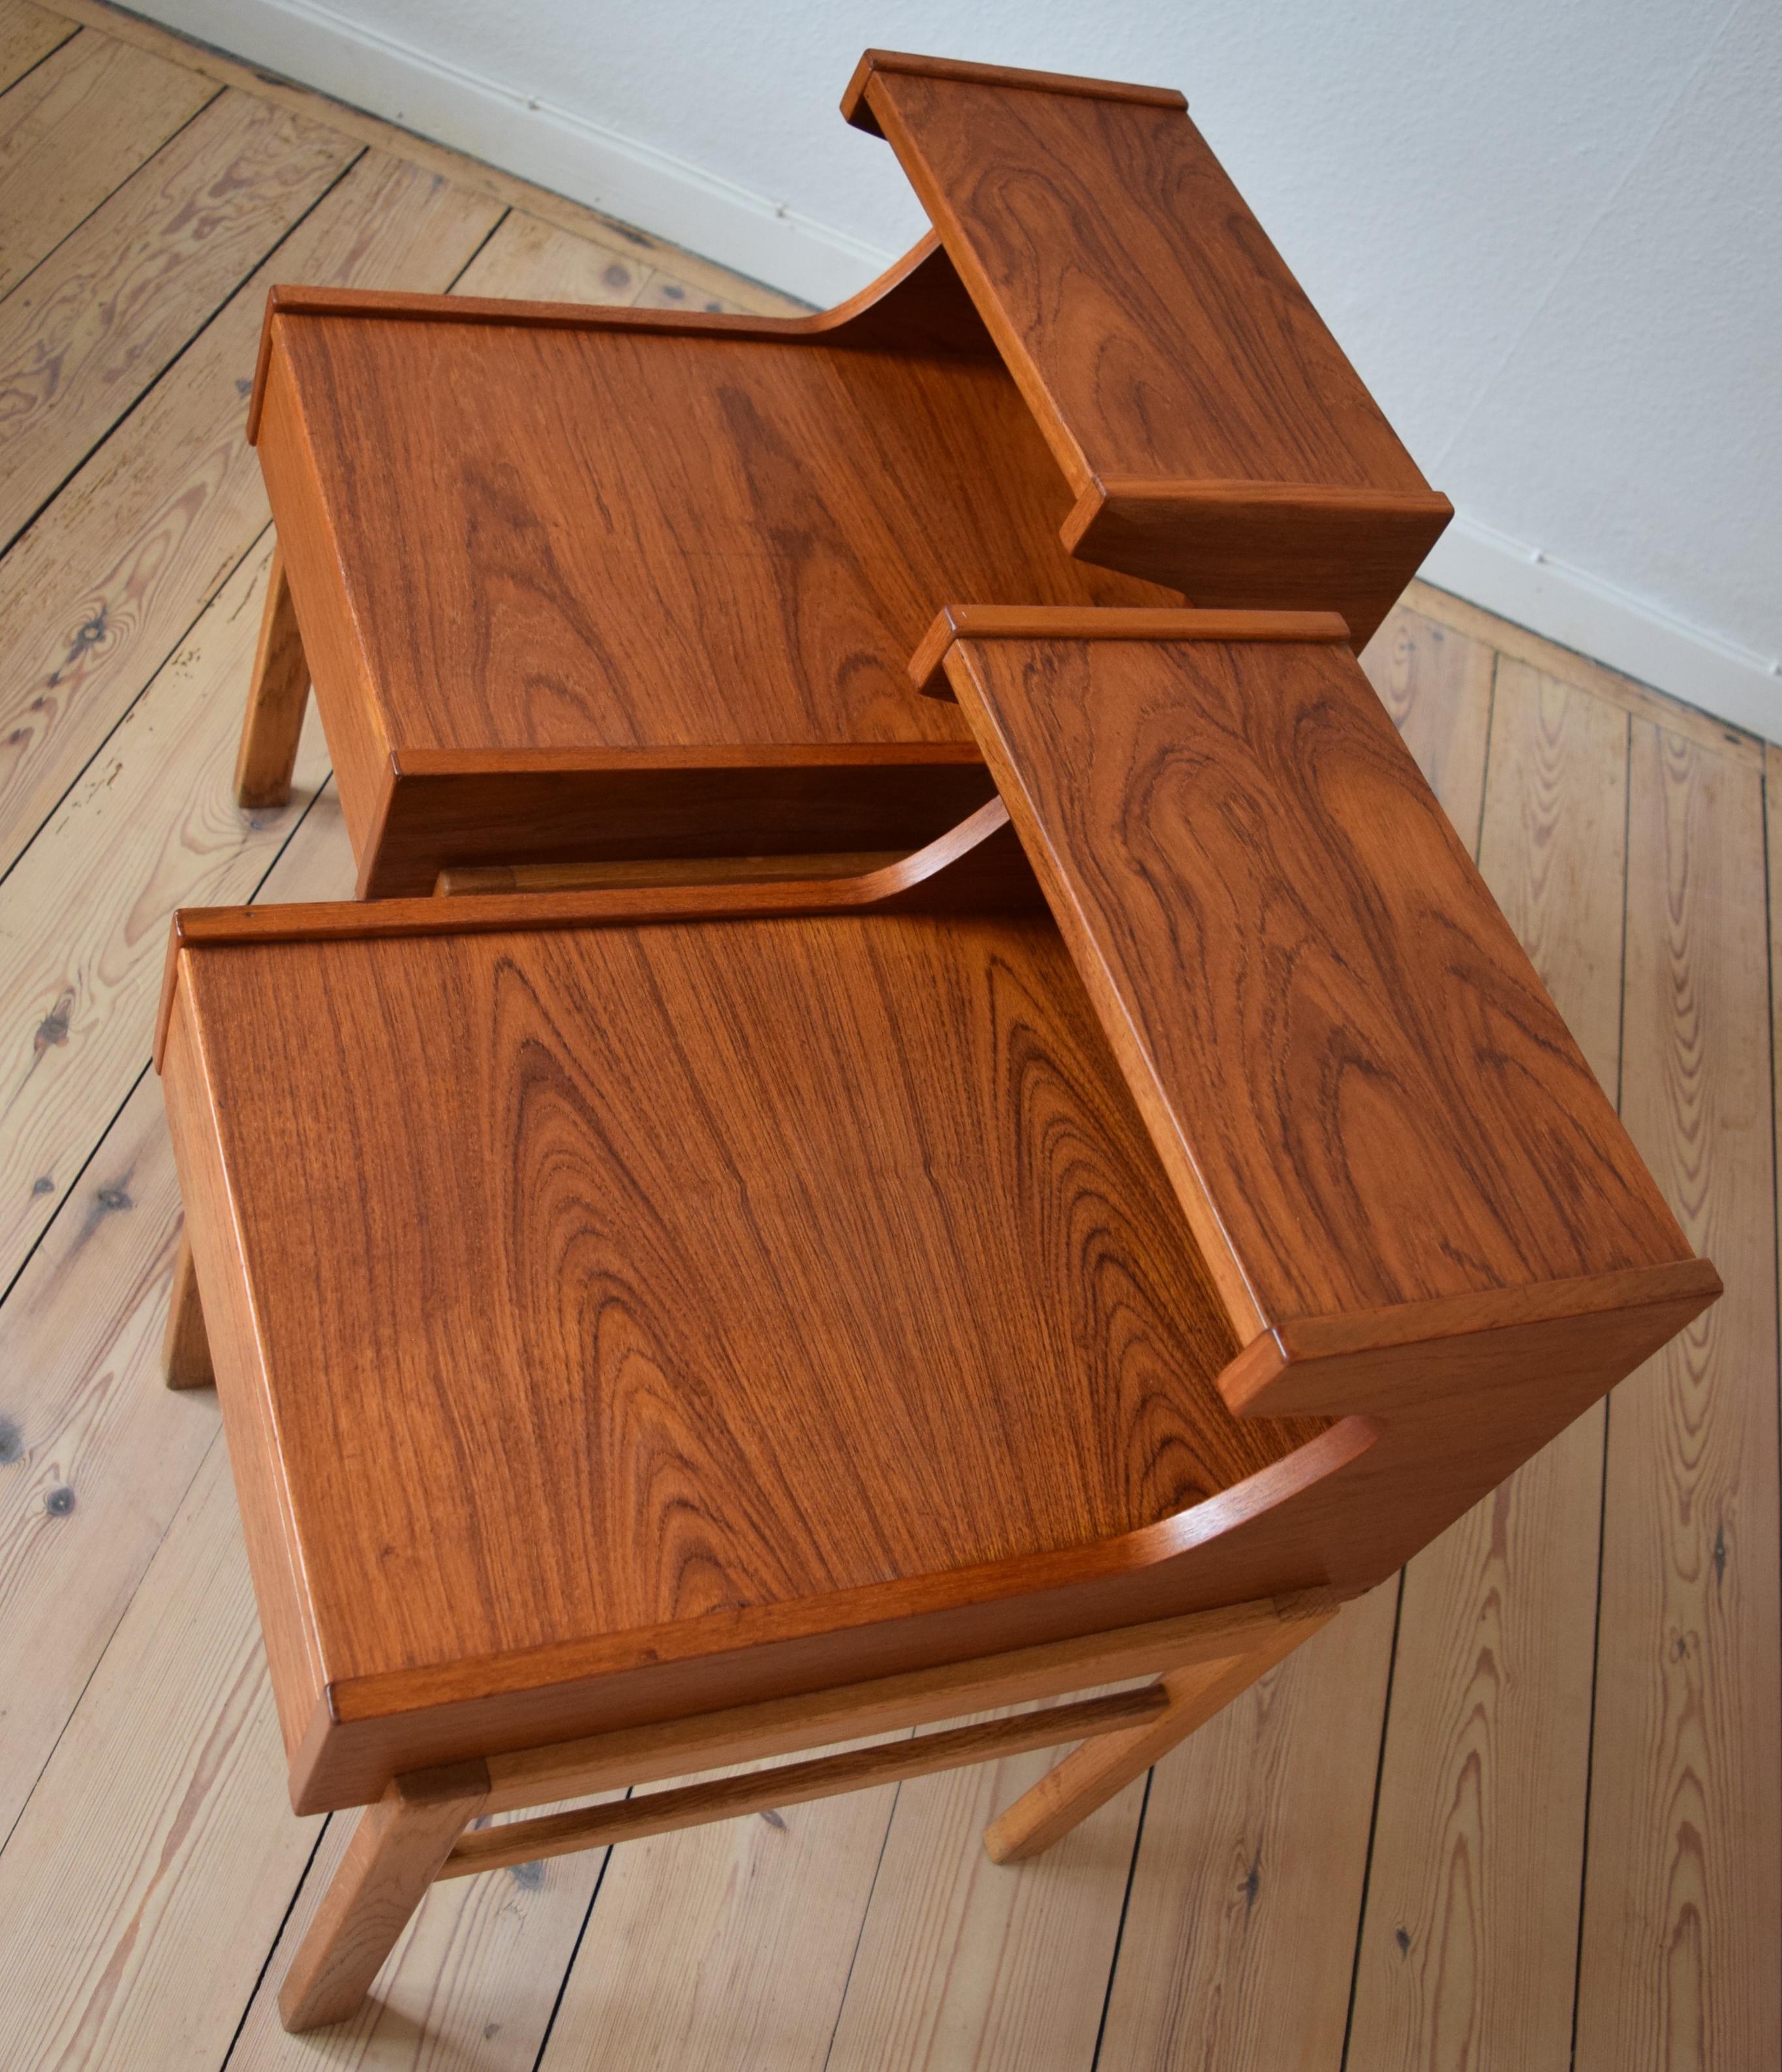 Set of teak night tables manufactured in Denmark in the 1960s. Each unit features a drawer and stacked top-plates. The tables sit on oak frame base legs. Apart from a few minor marks these tables are in a very good vintage condition.